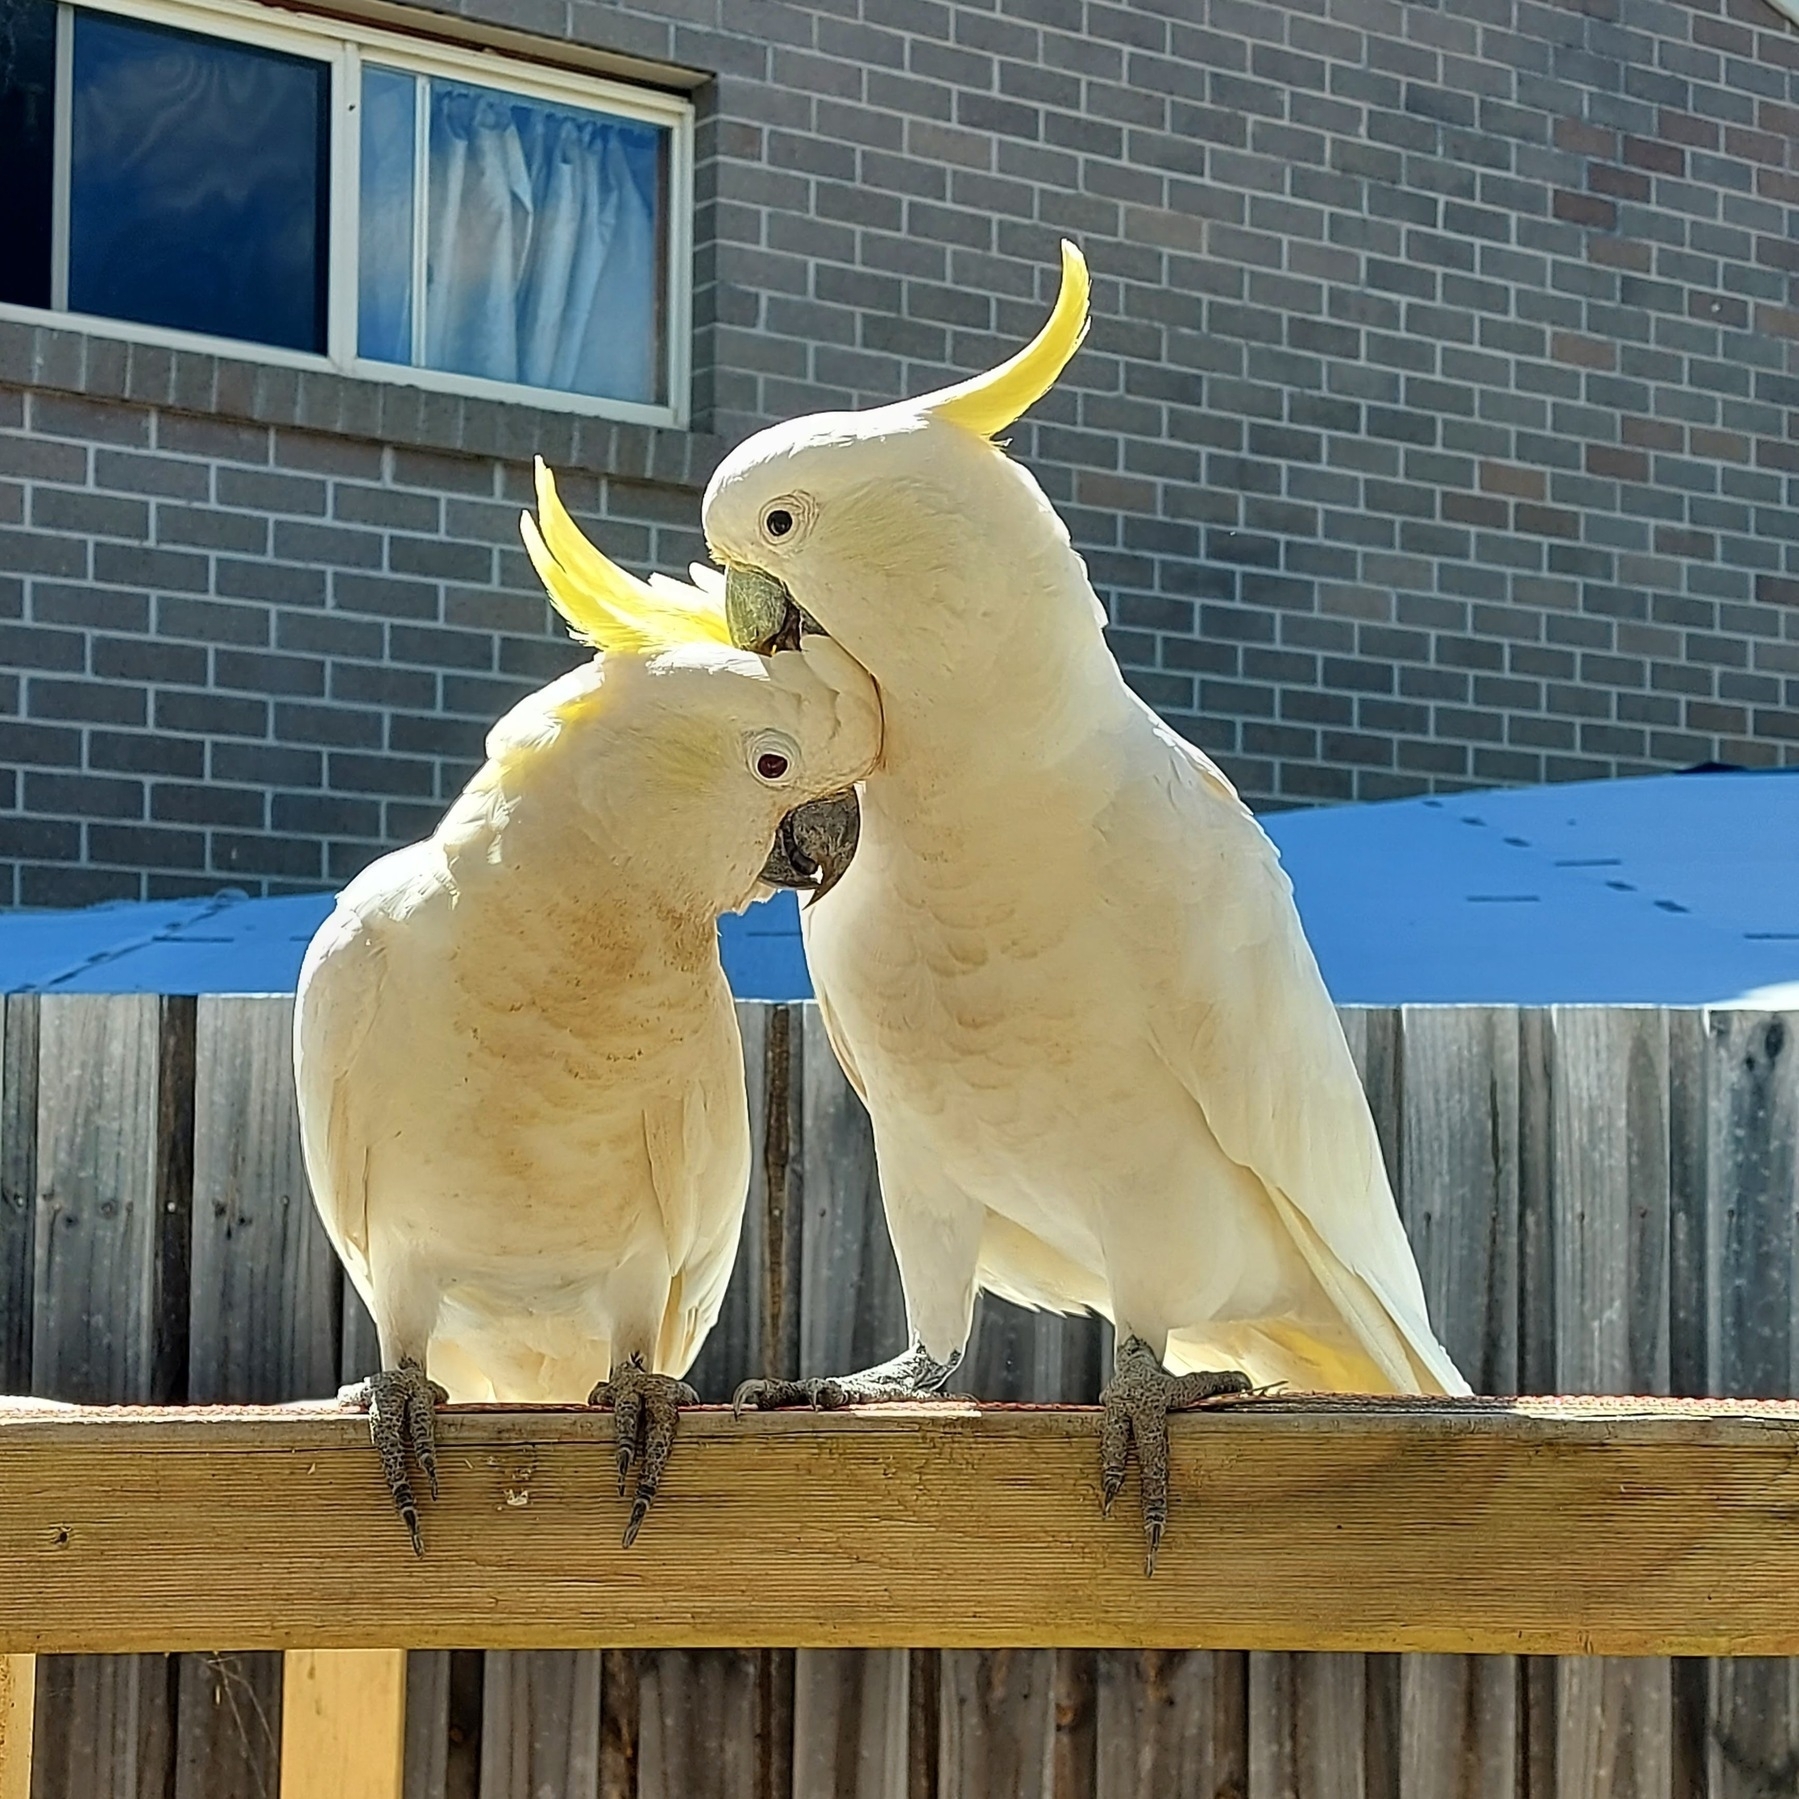 Two sulphur-crested cockatoos perched on a wooden rail, with one preening the other